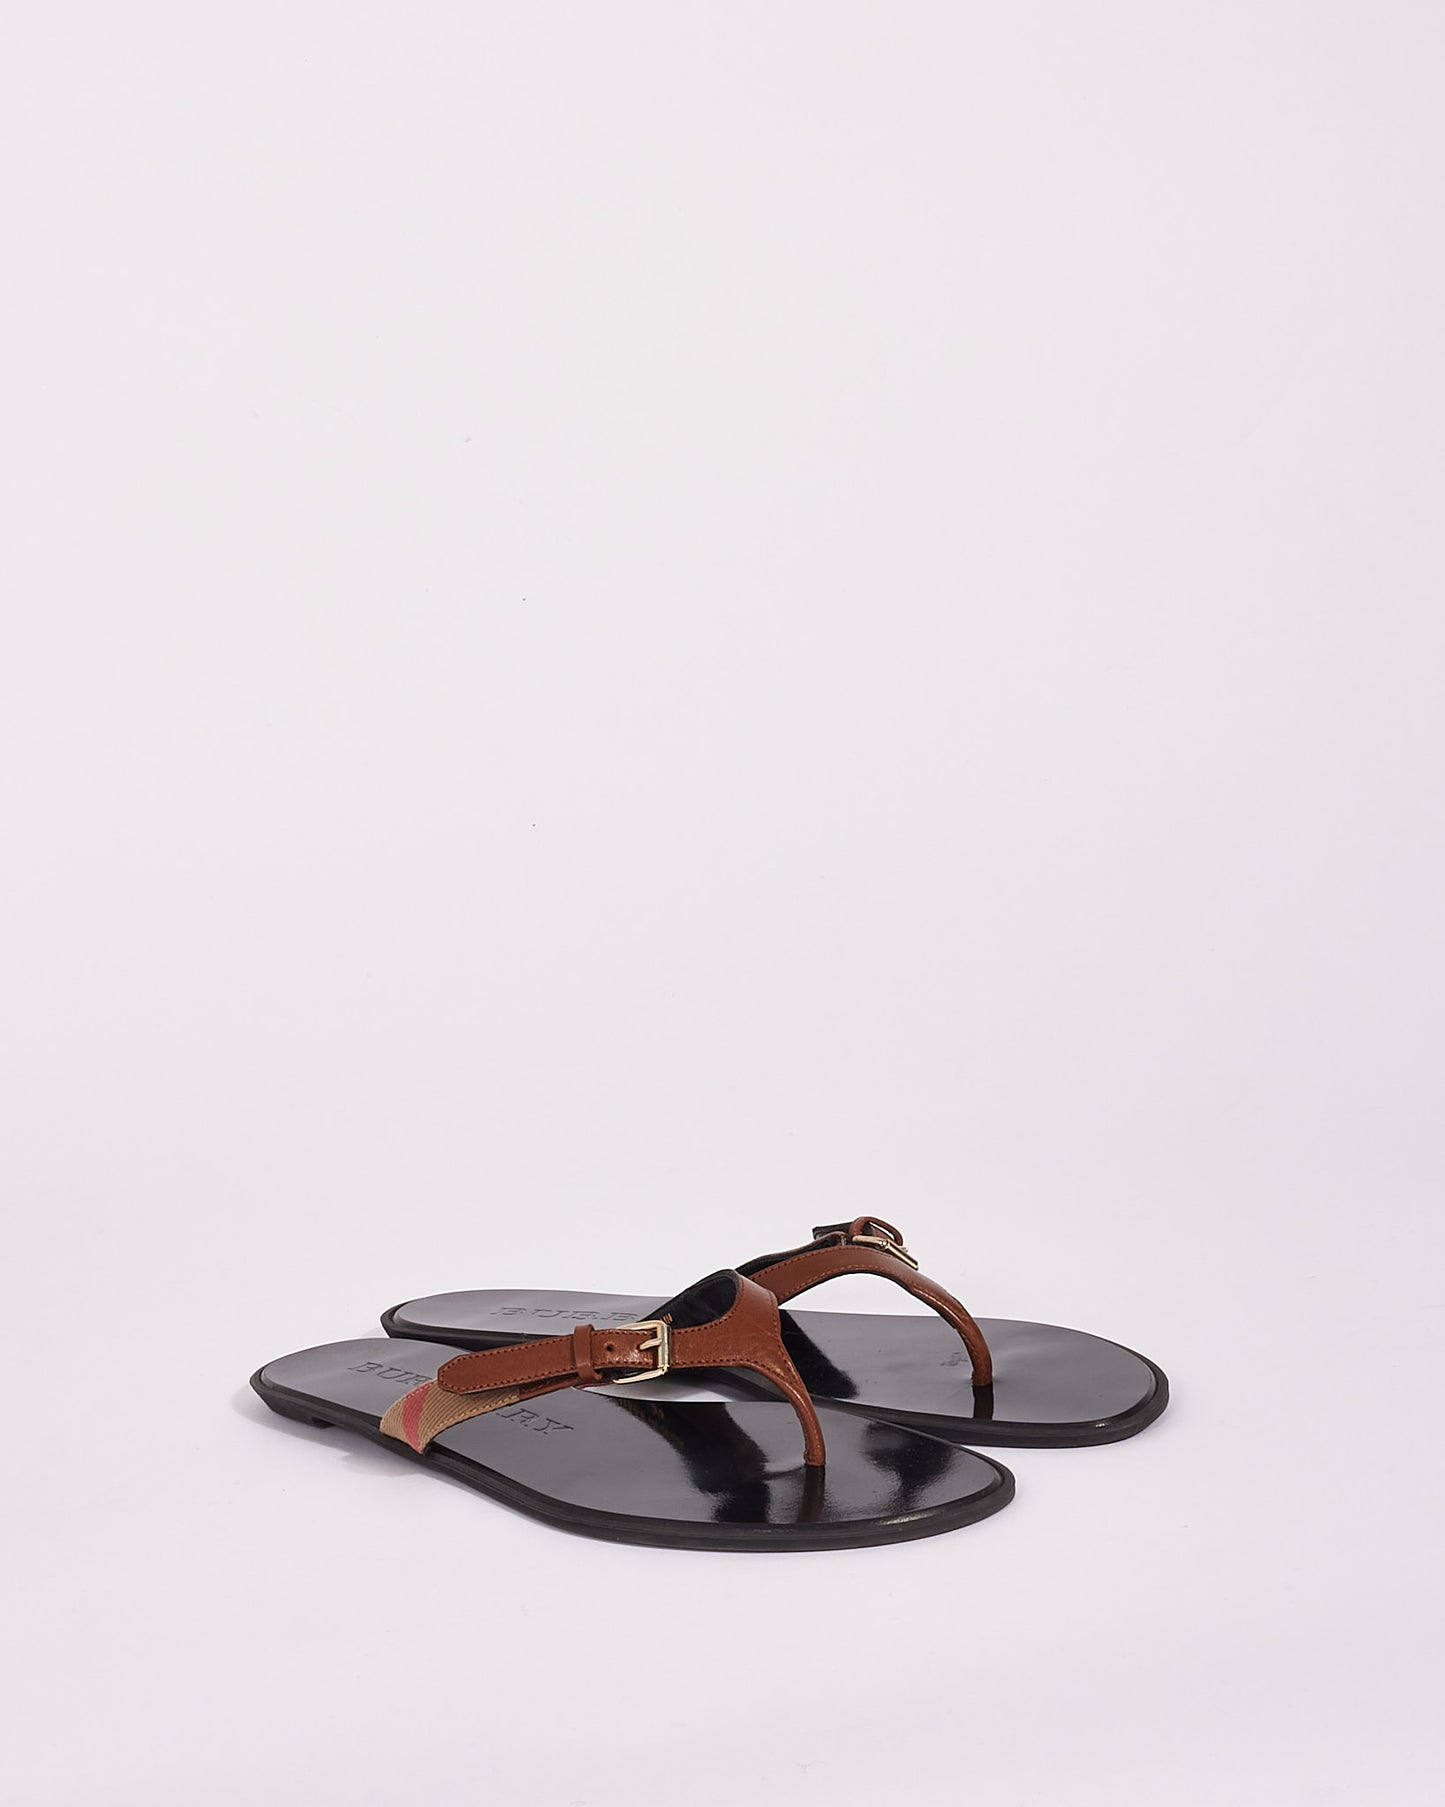 Burberry Brown Check Print Leather Flip Flop Sandals - 39